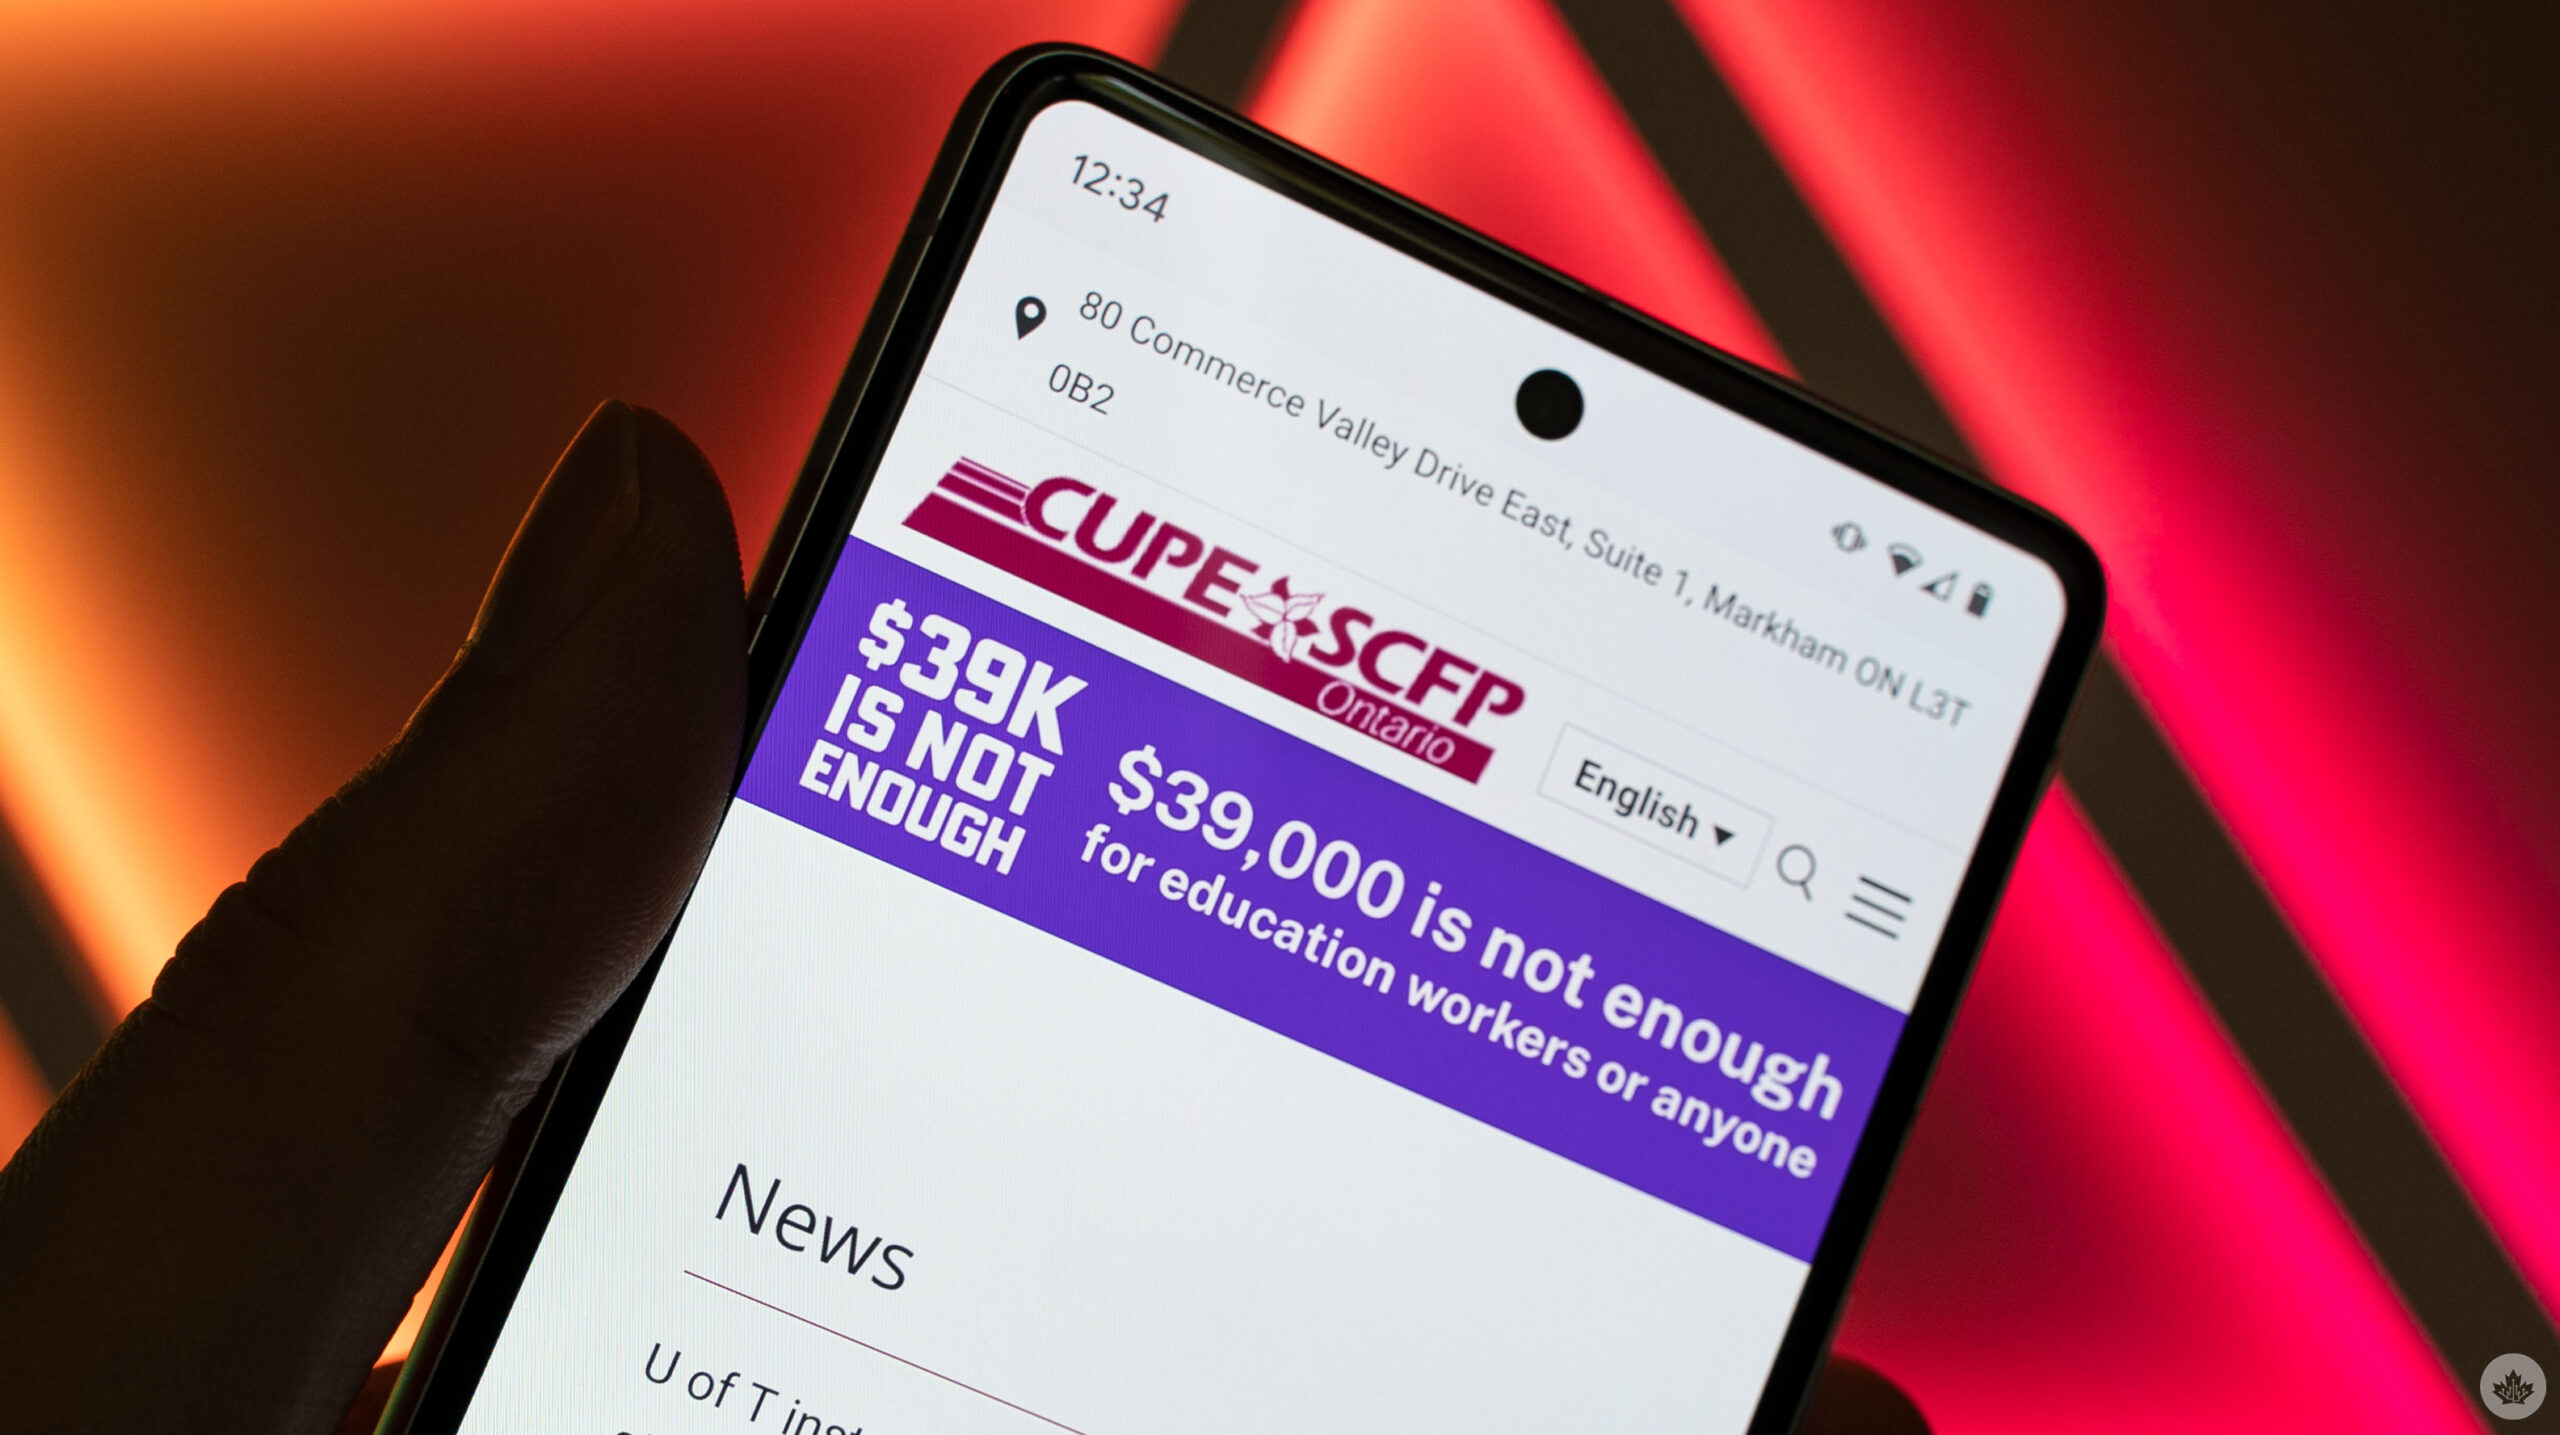 CUPE website on a smartphone